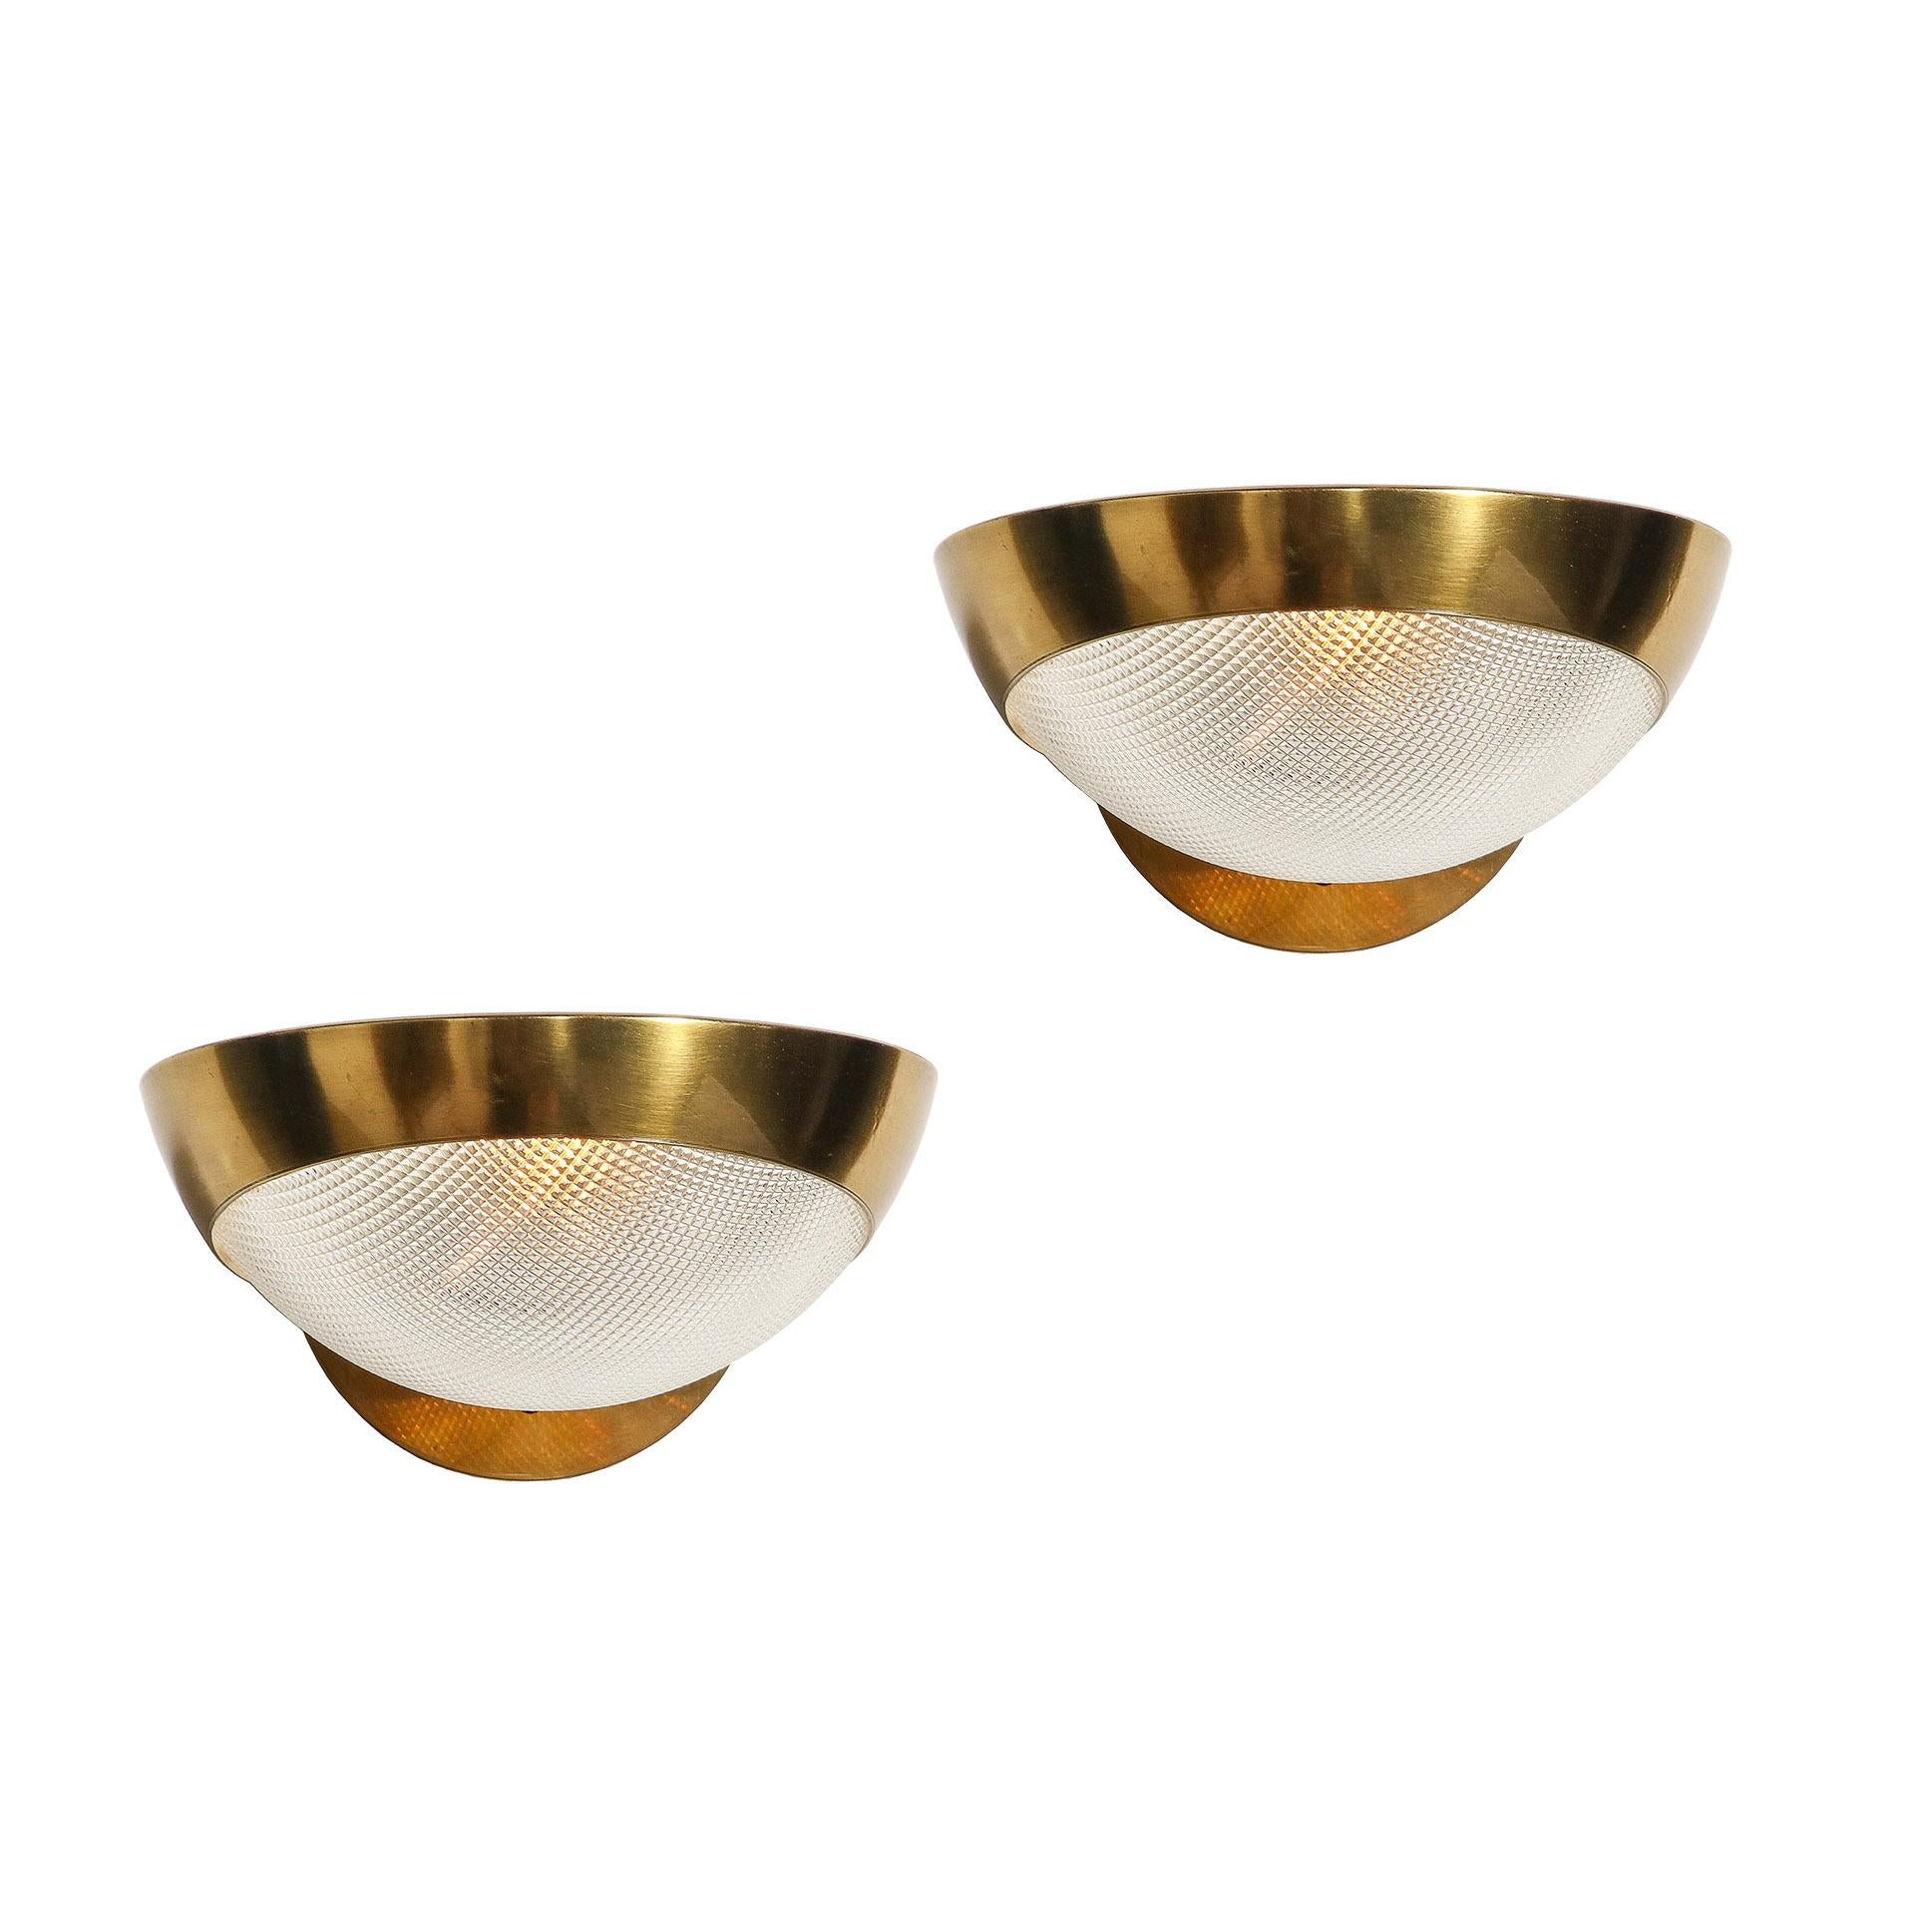 The pair of brass wall lights by Stilnovo with original labels. The glass shades have been remade to the original form and type.